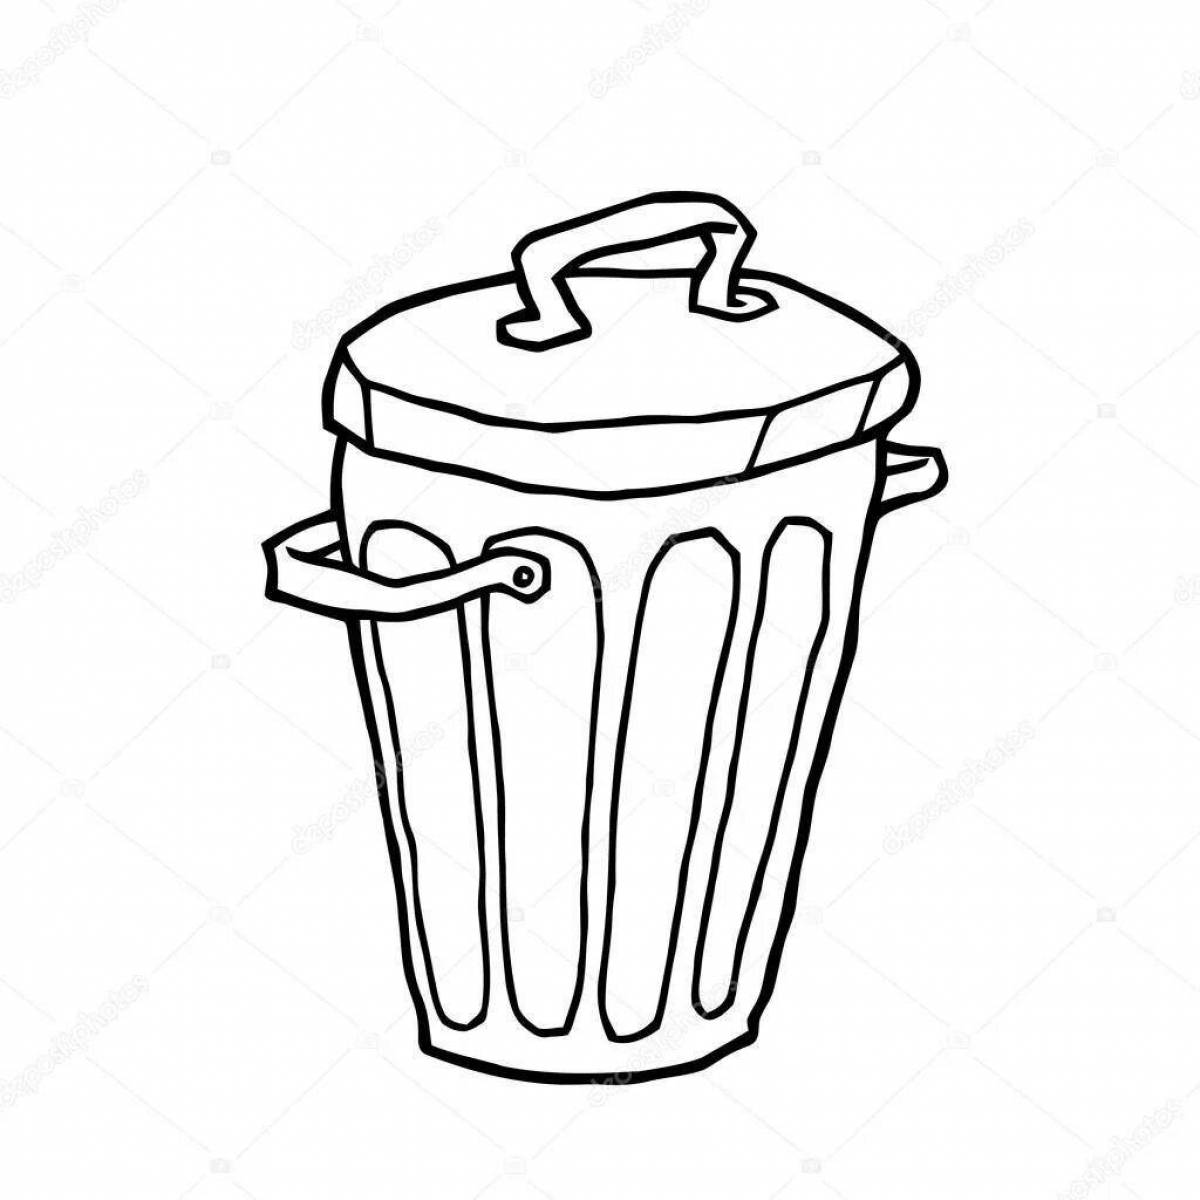 Tempting trash can coloring page